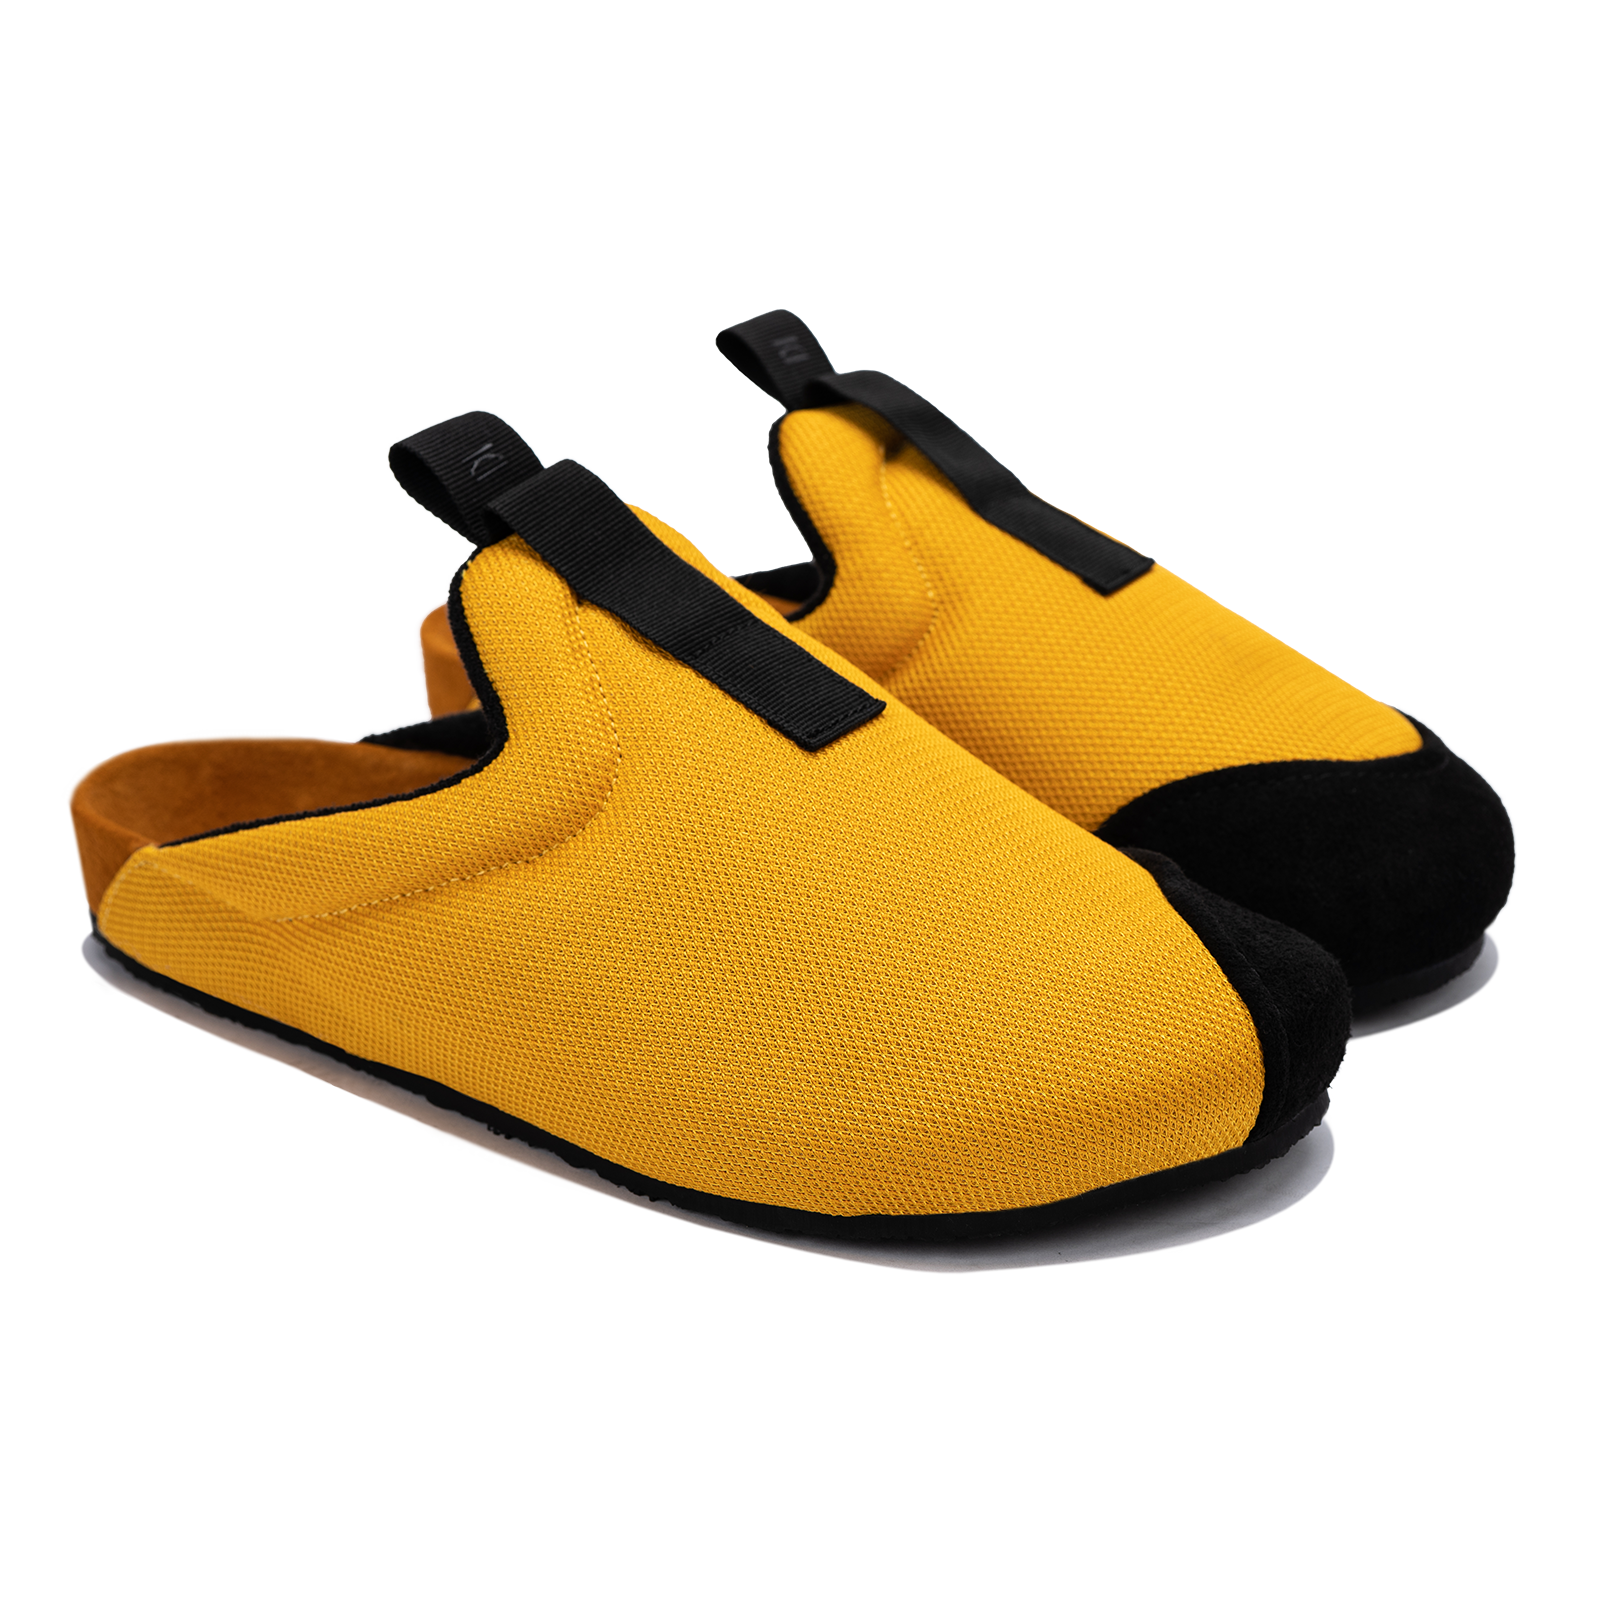 Other 3/4 view Bantha 2.0 Yellow is a Mule made of Yellow mesh with a Black hairy suede to overlay, cork midsole with suede top lining Black VIbram rubber bottom and woven top pull